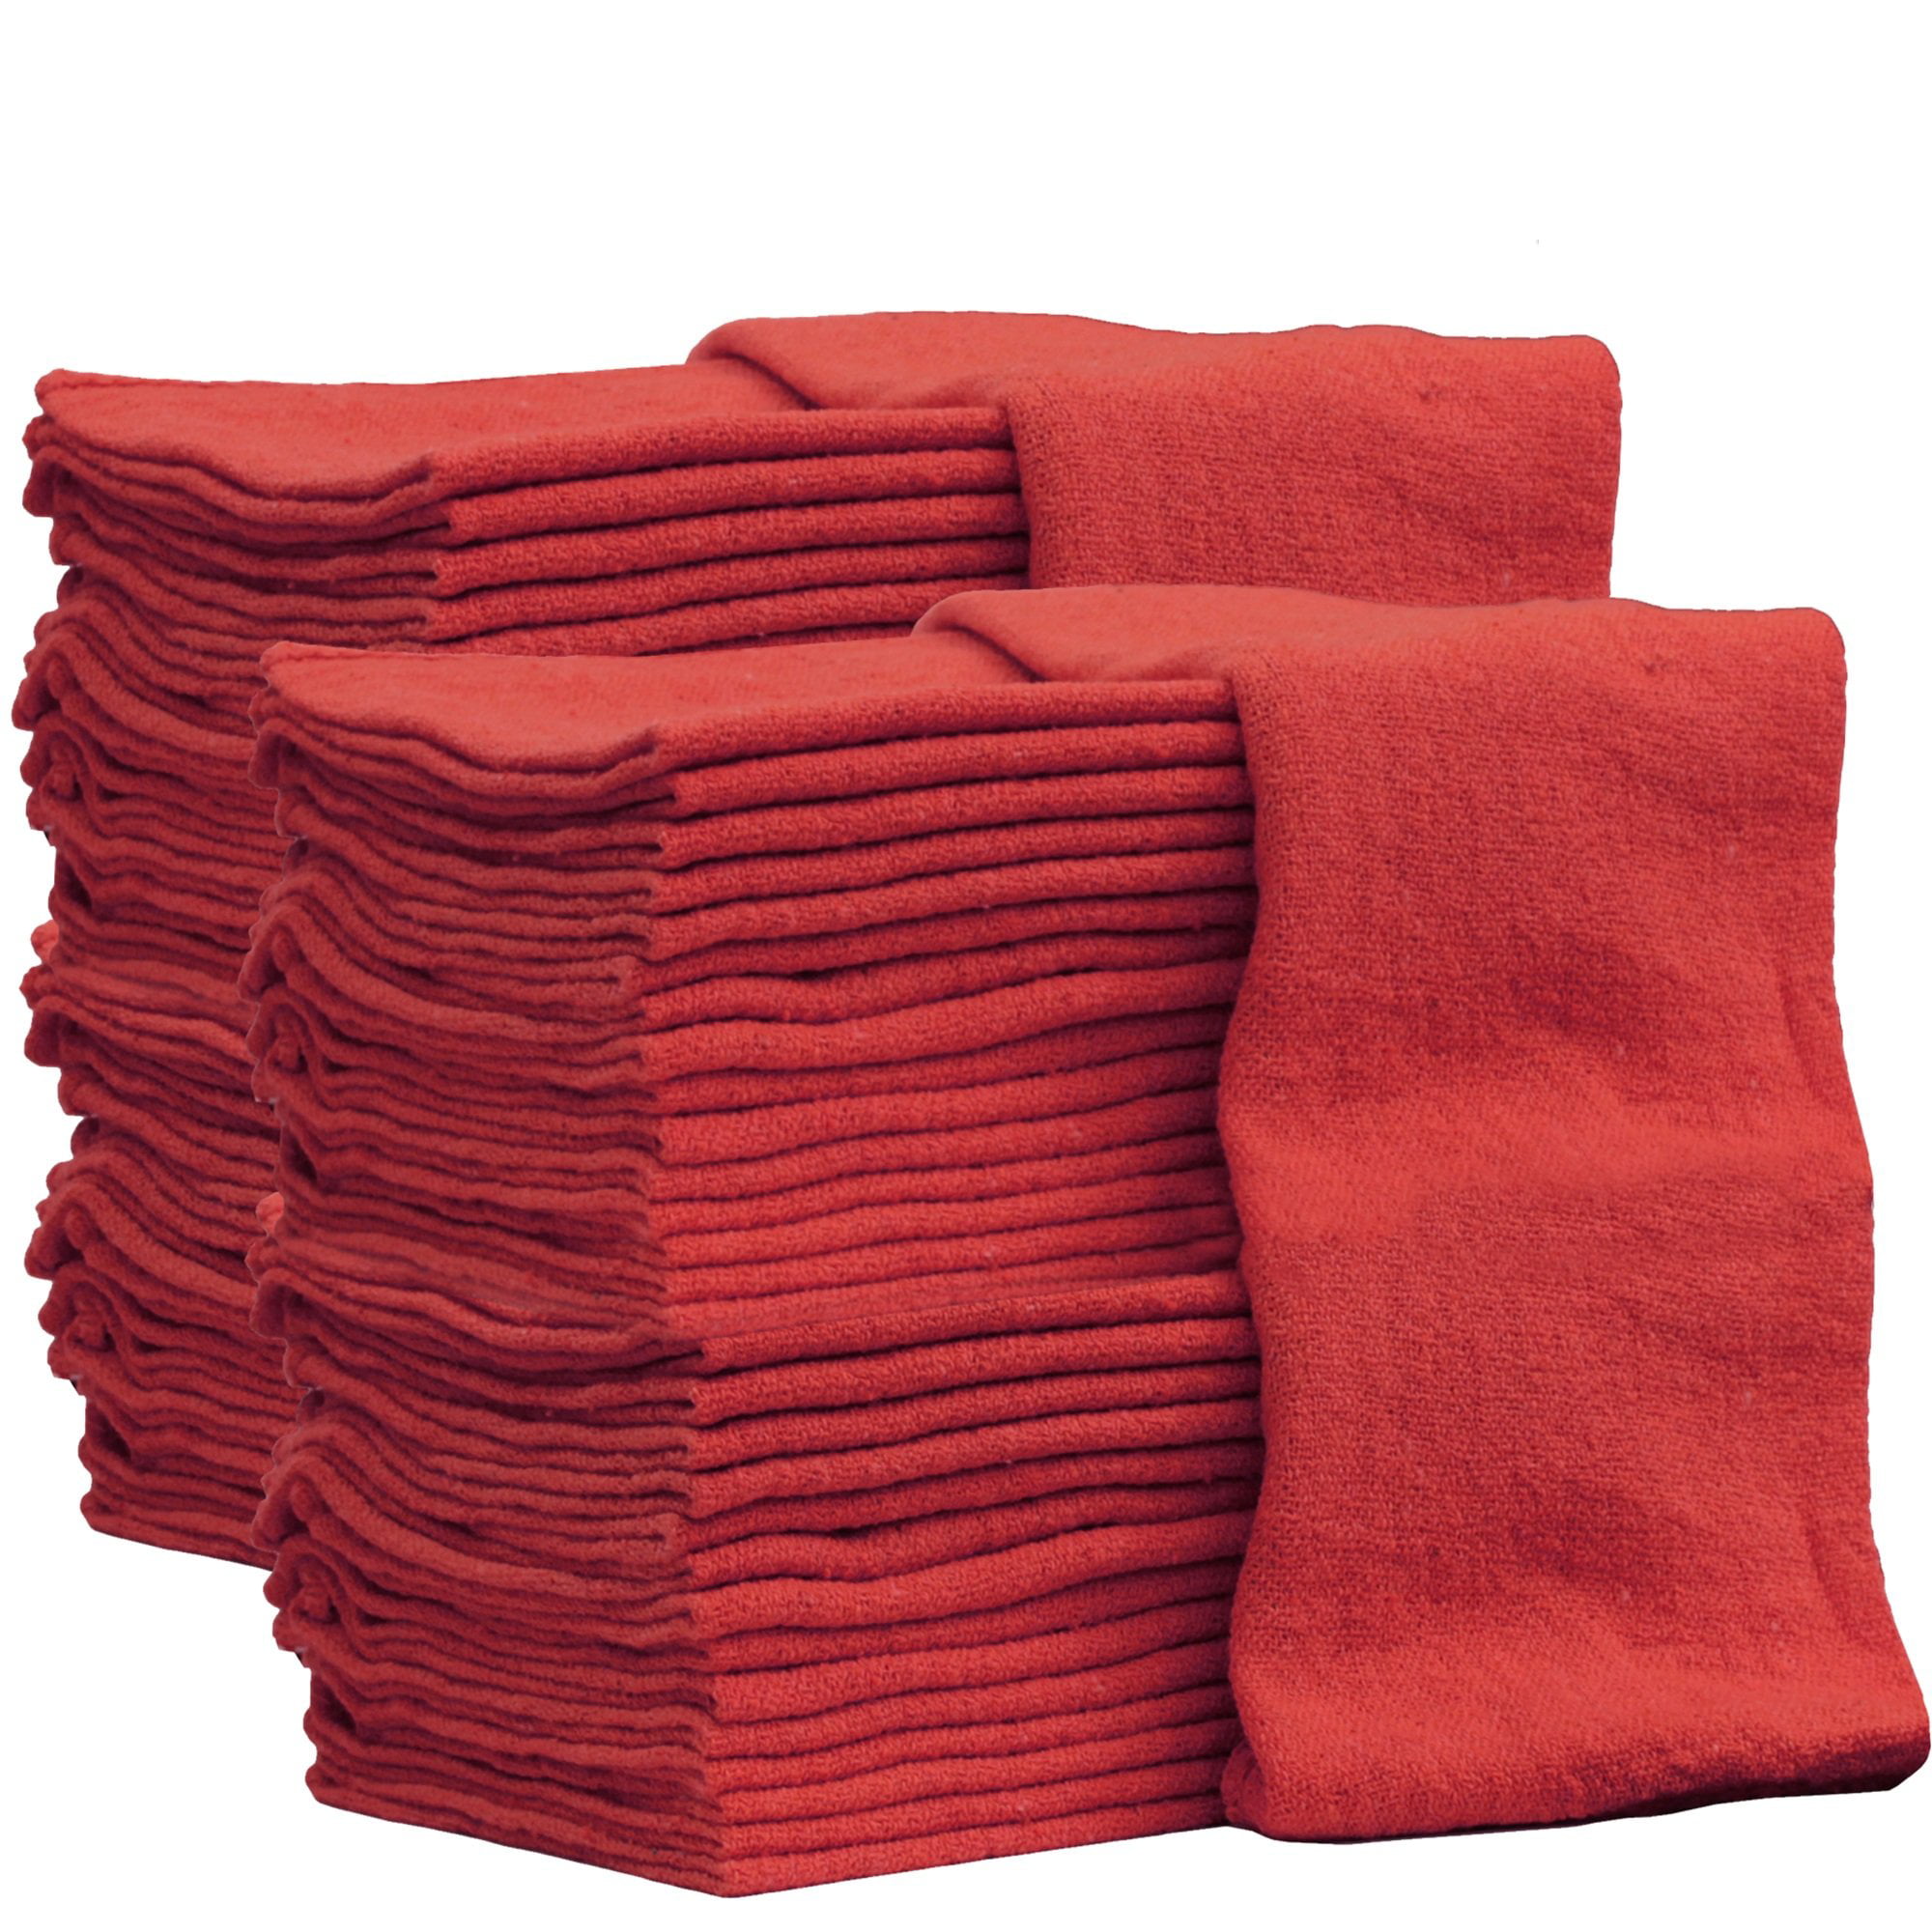 10 Pack Red Industrial Grade Cotton Shop Rags/ Cloth Towels 